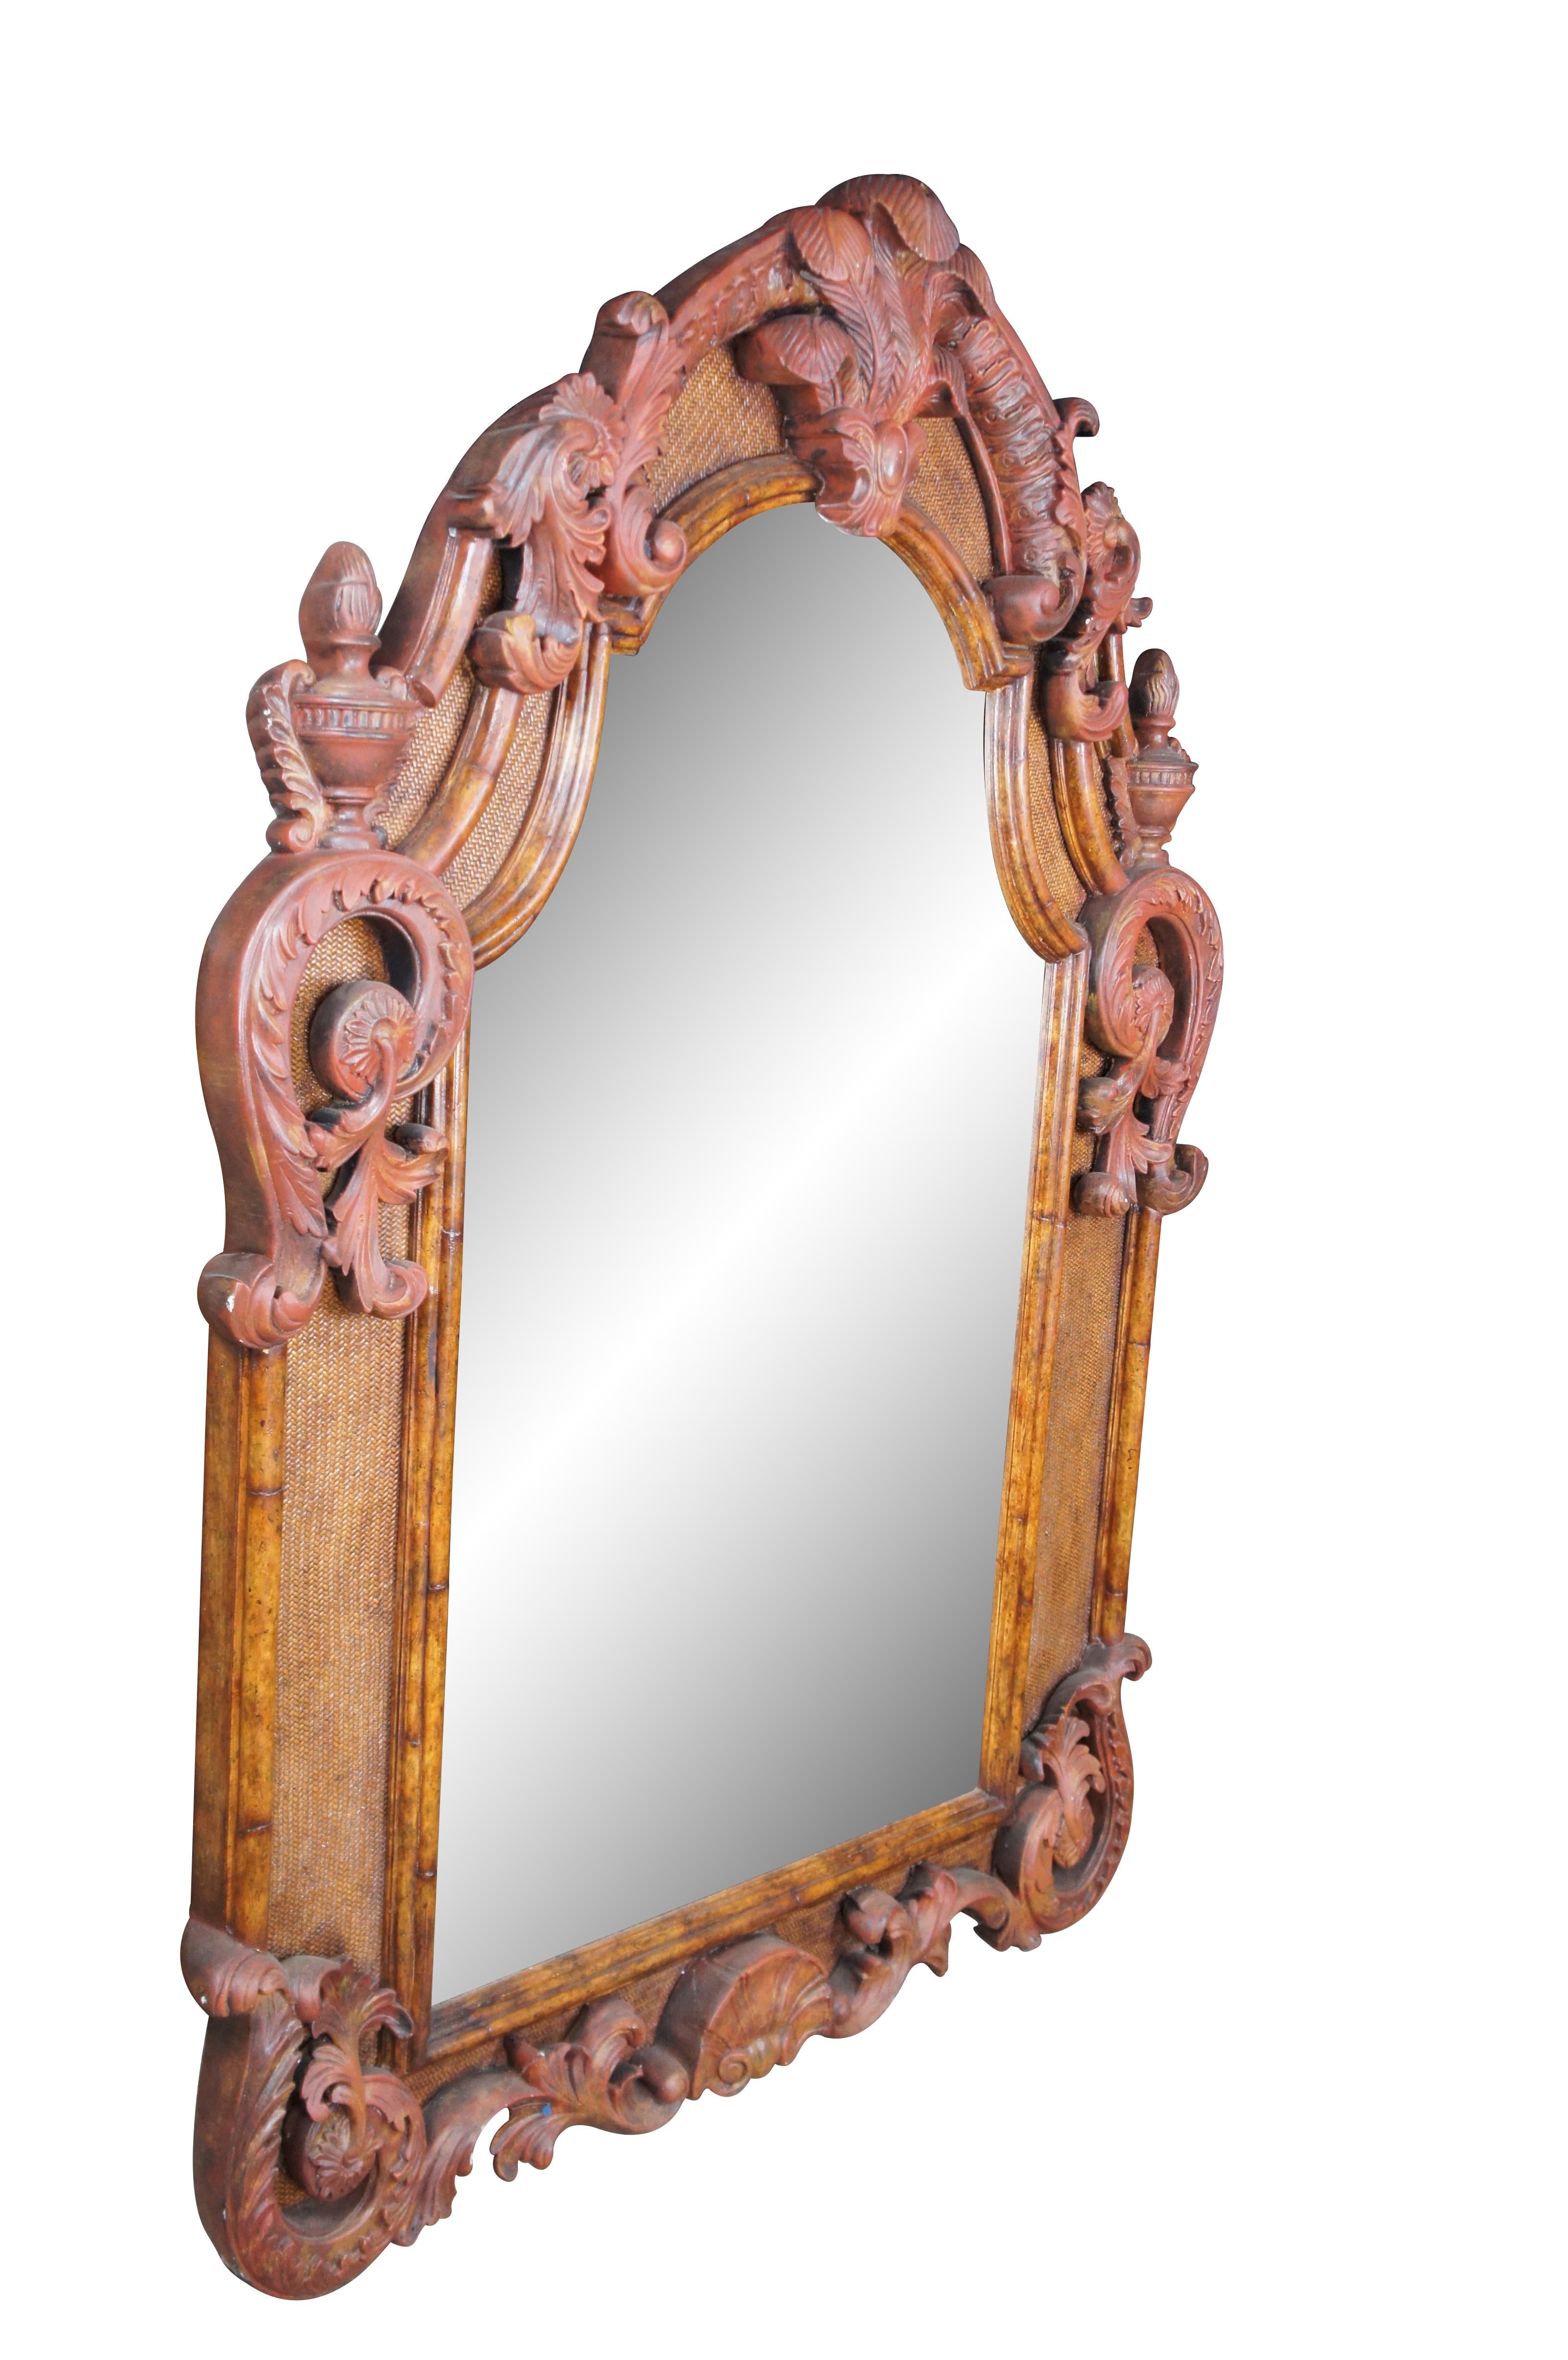 A stately Baroque Rococo style wall hanging mirror by Maitland Smith, circa last quarter 20th century.  Made from walnut with a rattan backing and ornate low relief painted embellishments.  Features an arched crown centered by Prince of Wales